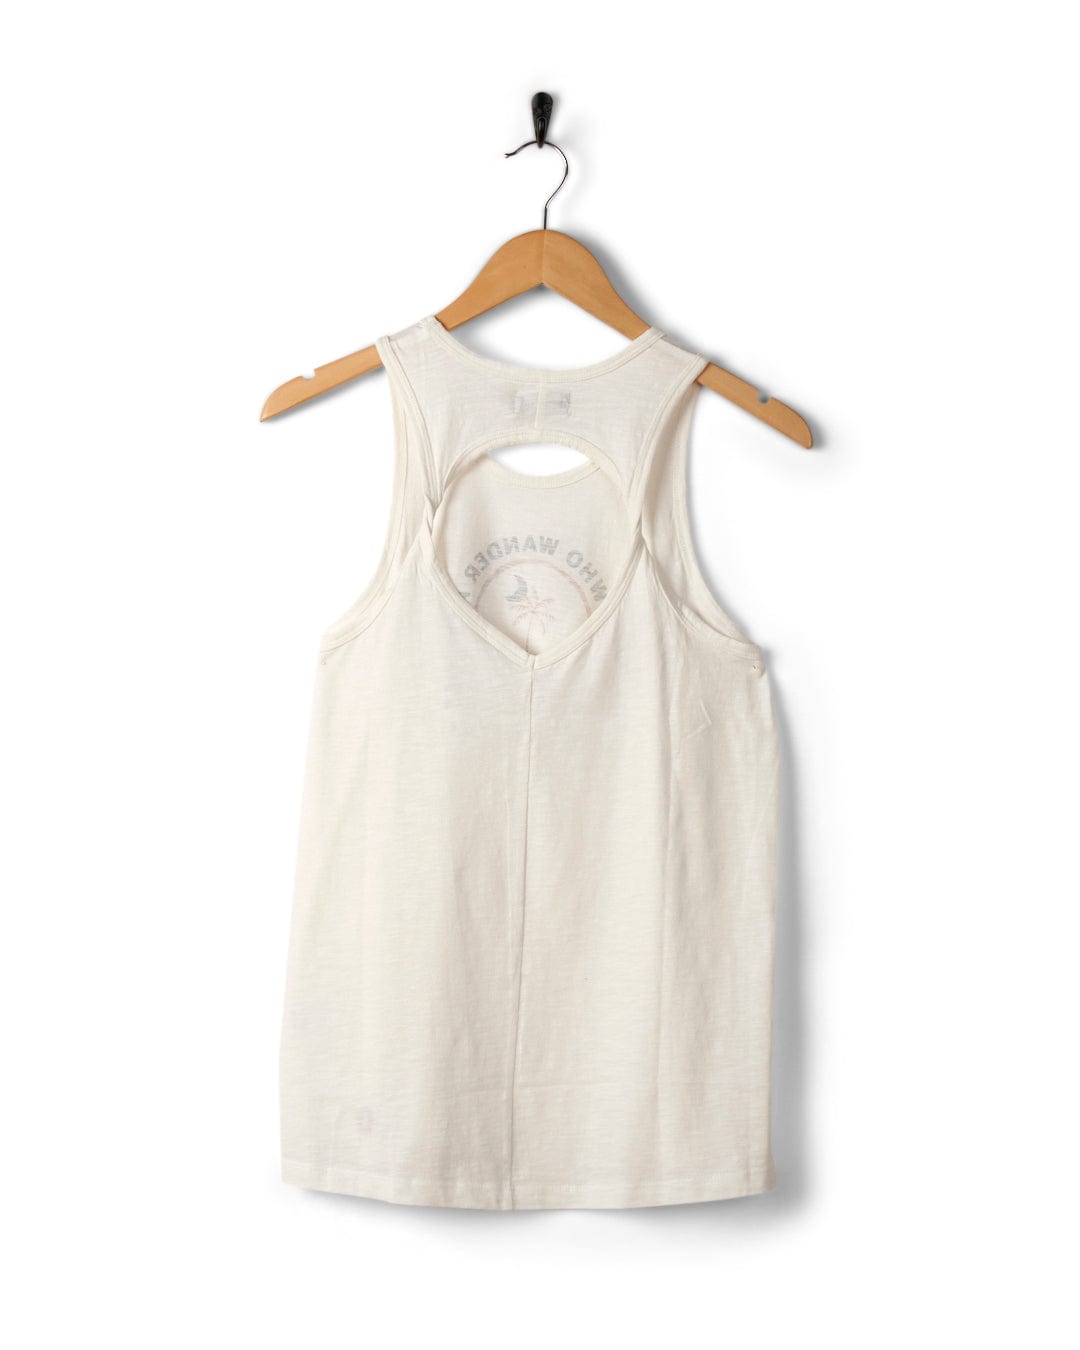 White Palmera sleeveless tank top, made from 100% cotton, hanging on a black hanger against a white background. Brand: Saltrock.